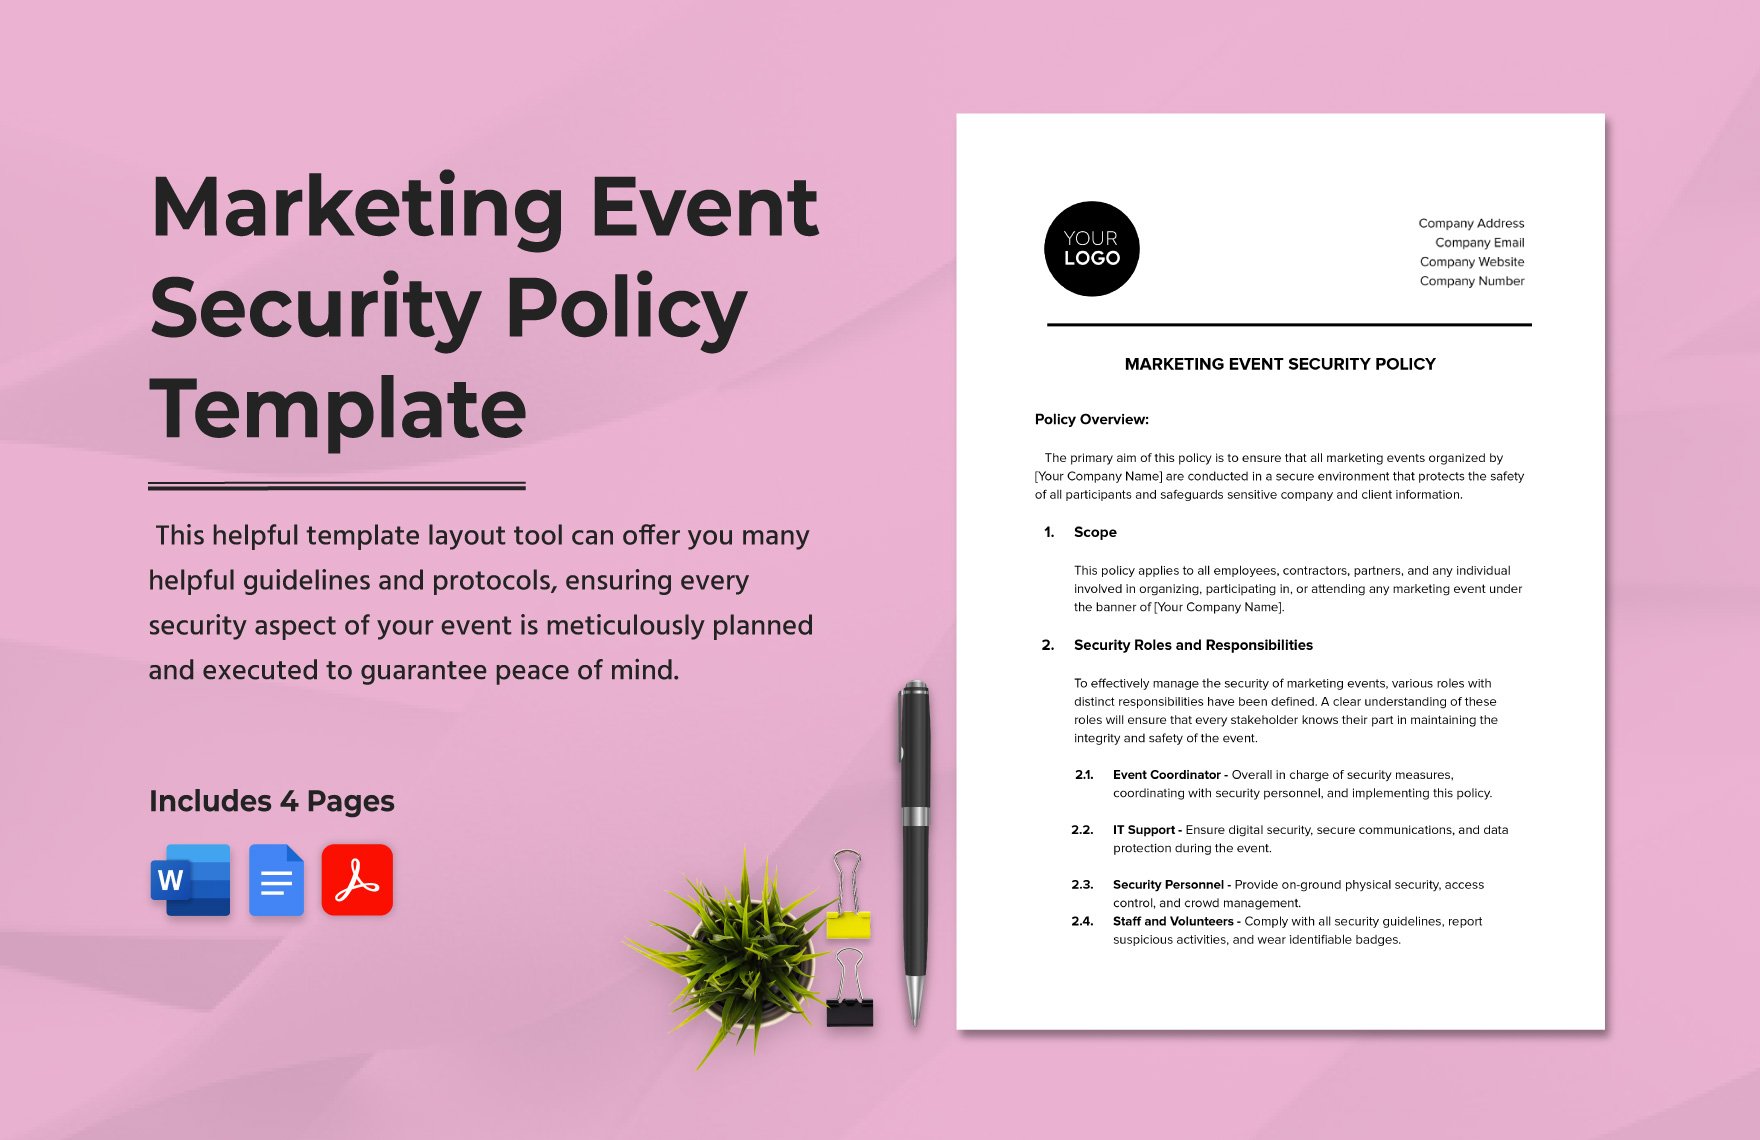 Marketing Event Security Policy Template 